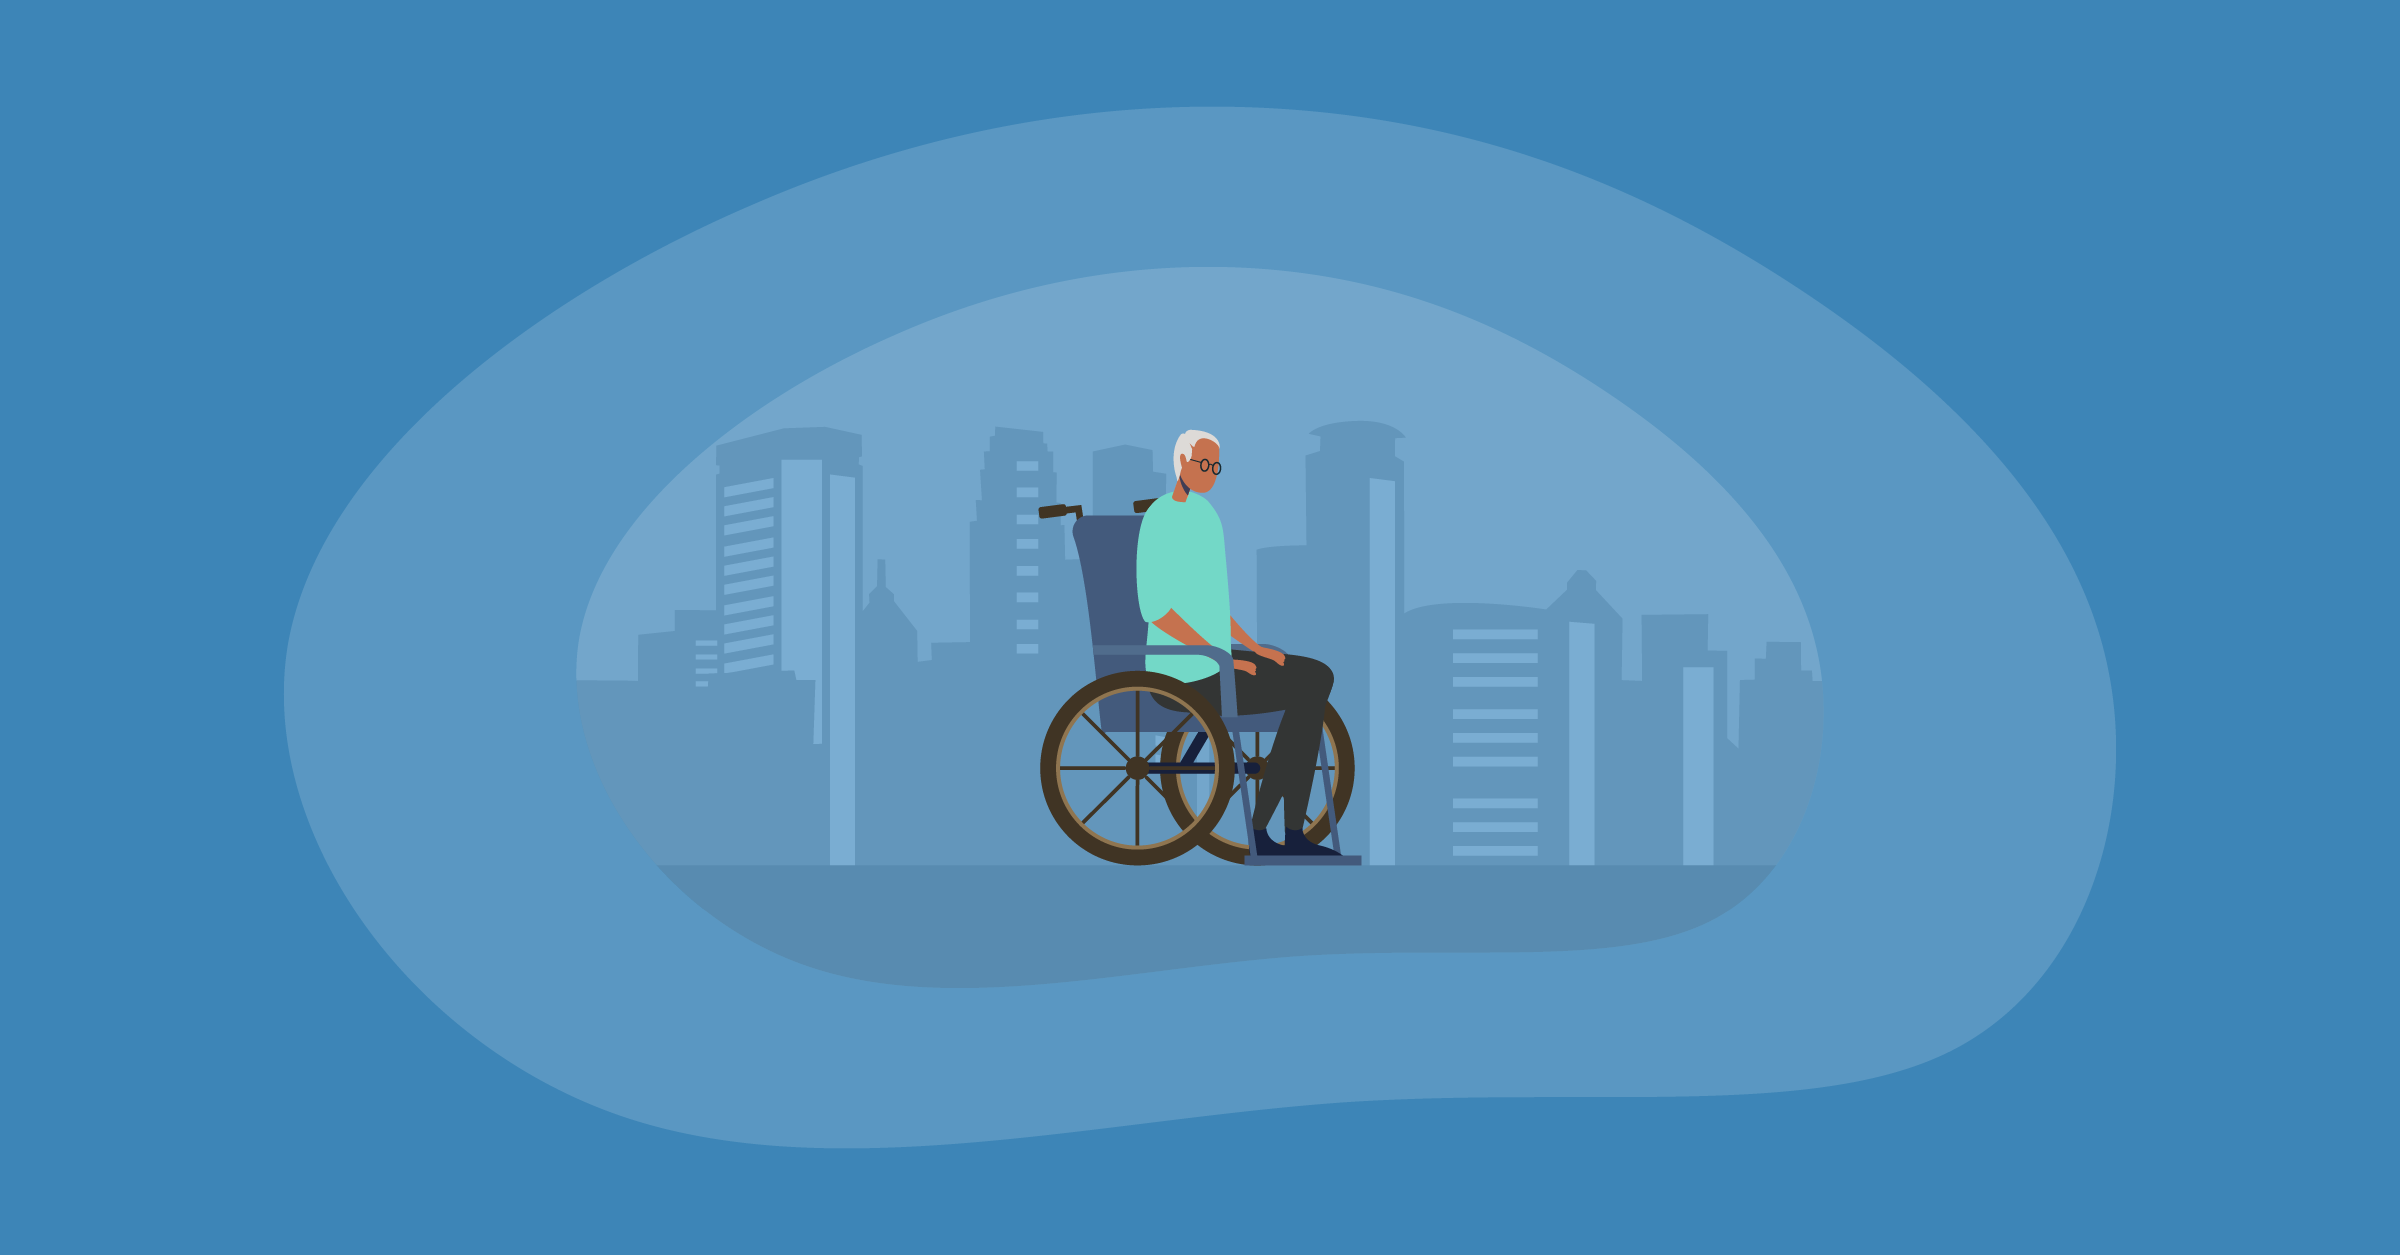 Illustration of an elderly in a wheelchair